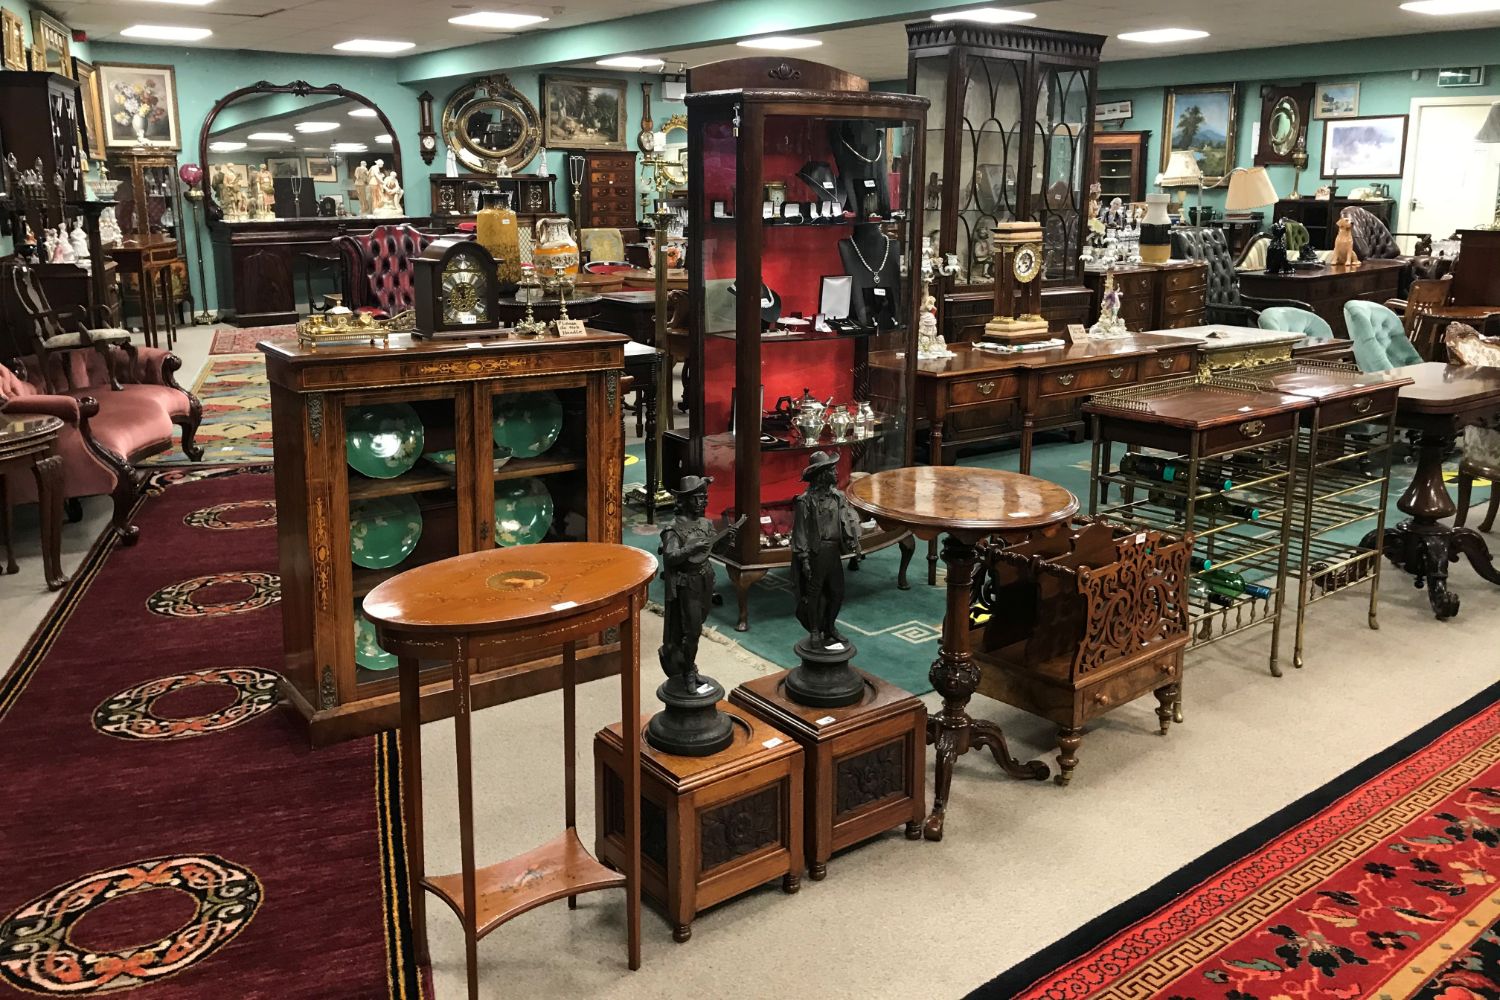 ONLINE Auction of Antique Furniture, Fine Art, Jewellery and Collectables  on behalf of Important Clients on SATURDAY 12th DECEMBER AT 12.00PM